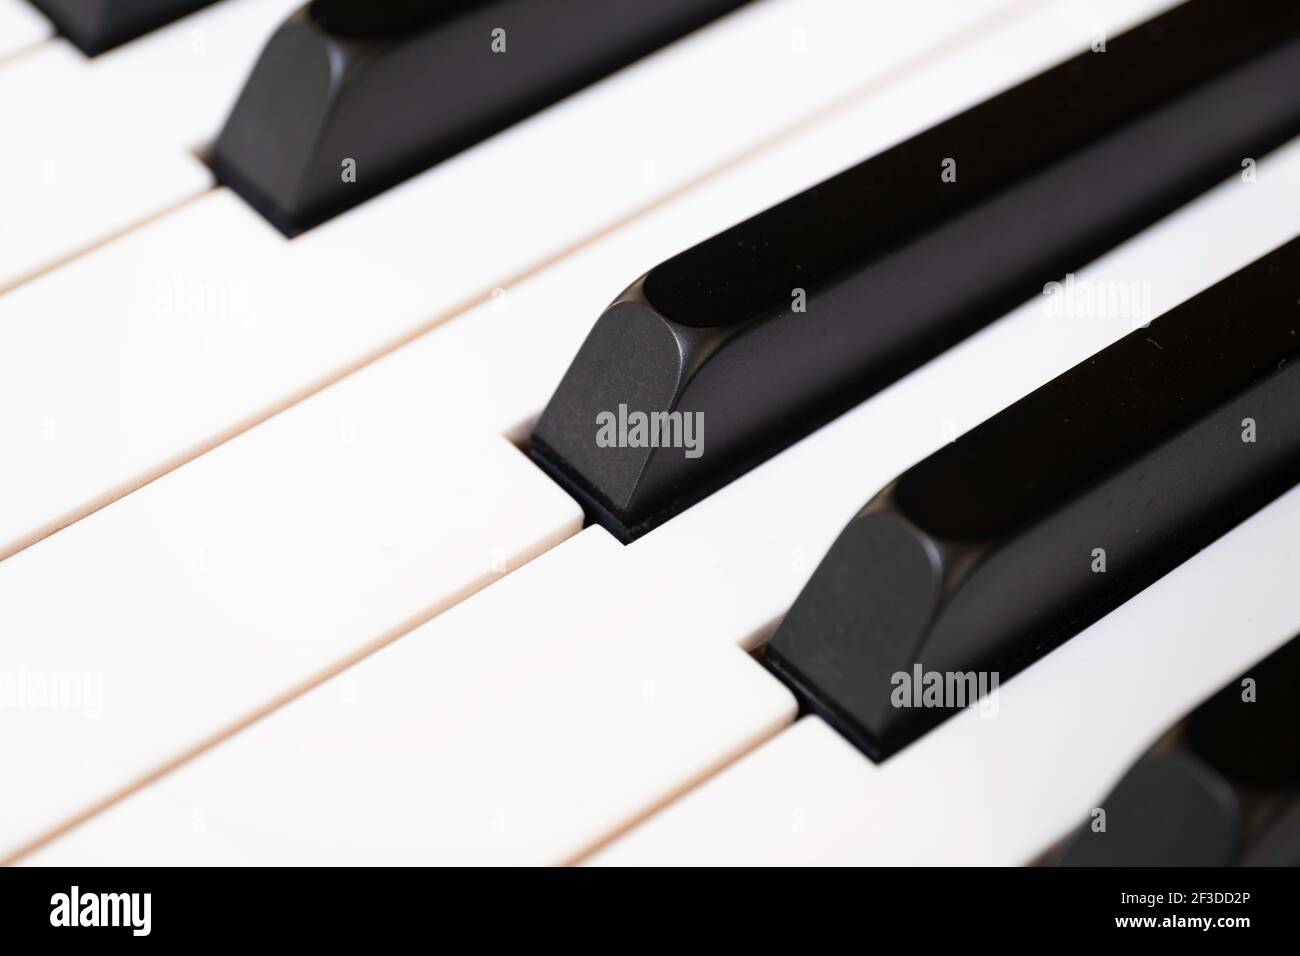 Black and white piano keys. The black keys are called sharps or flats.  Focus on the black key in the center of the image Stock Photo - Alamy